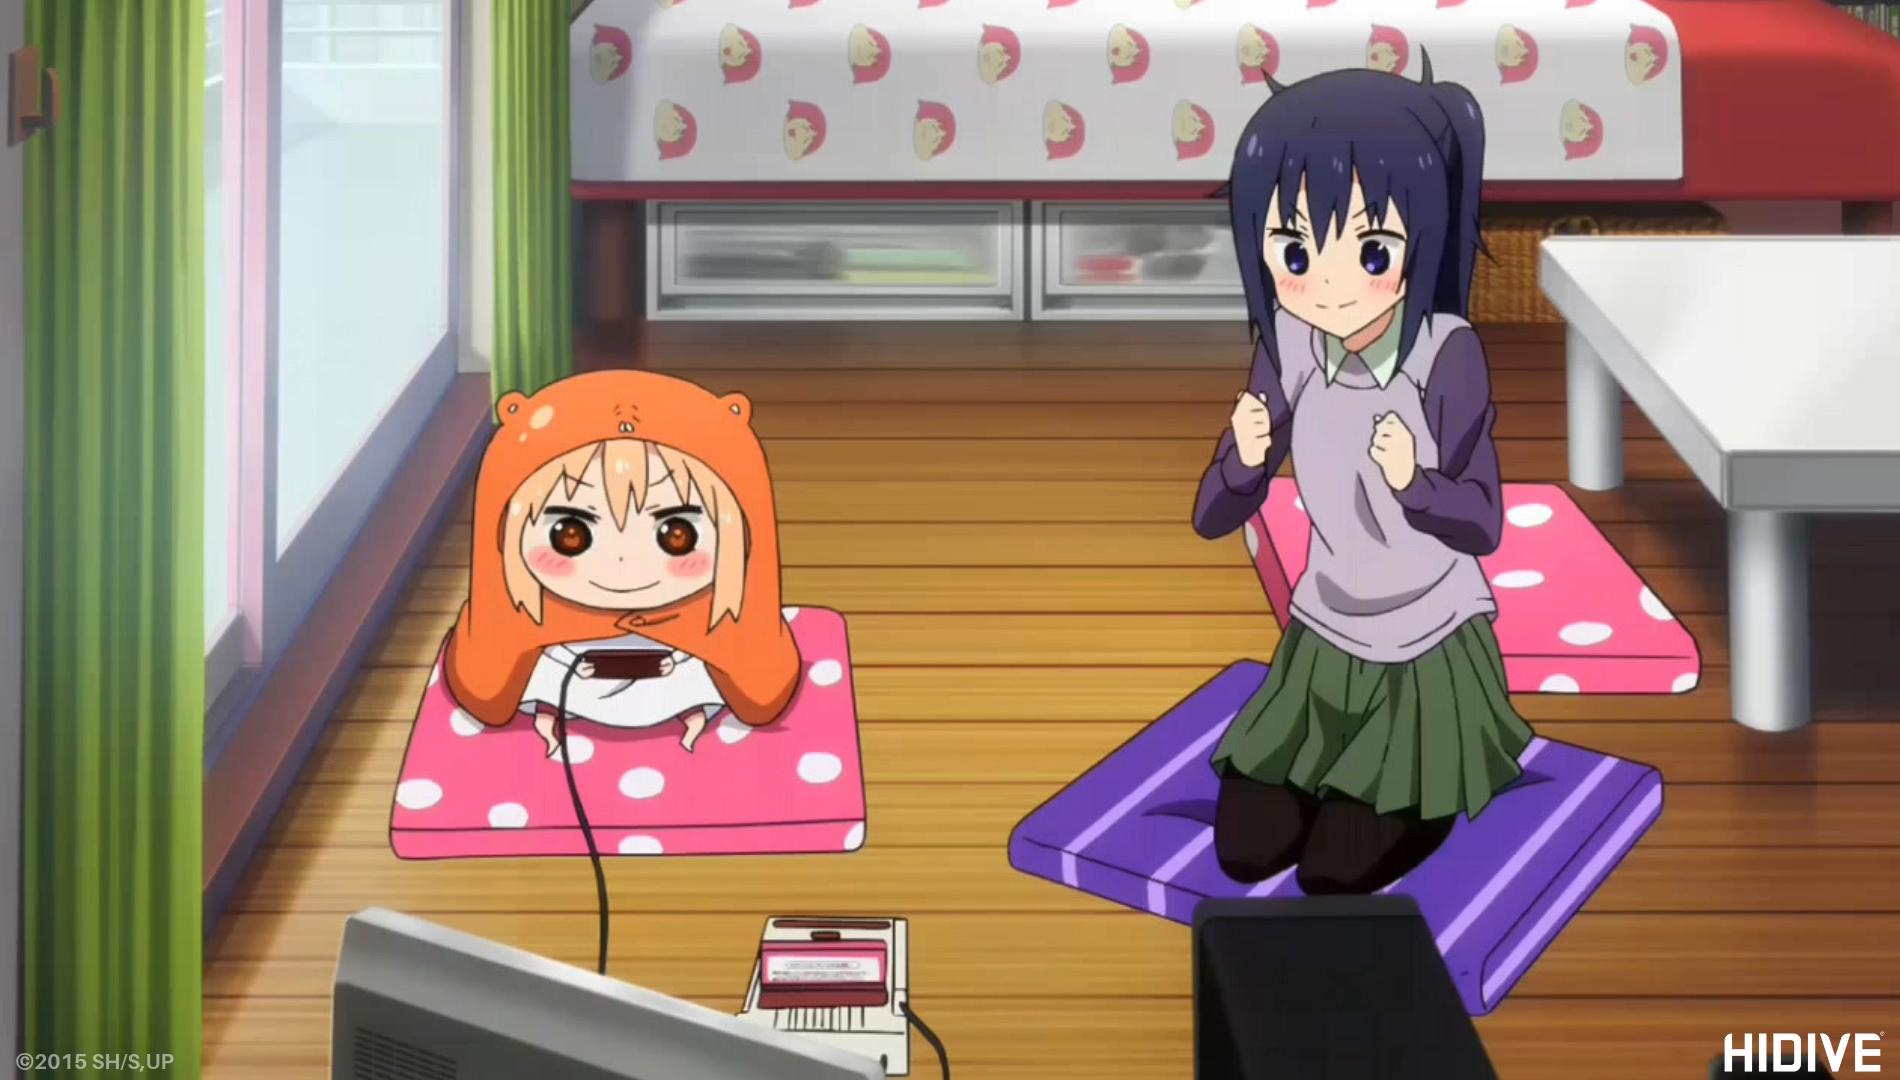 HIDIVE on "It's #NationalVideoGameDay what you currently playing? Himouto! Umaru-chan: https://t.co/SR5znHbYPm https://t.co/AXkwKppGyt" / Twitter